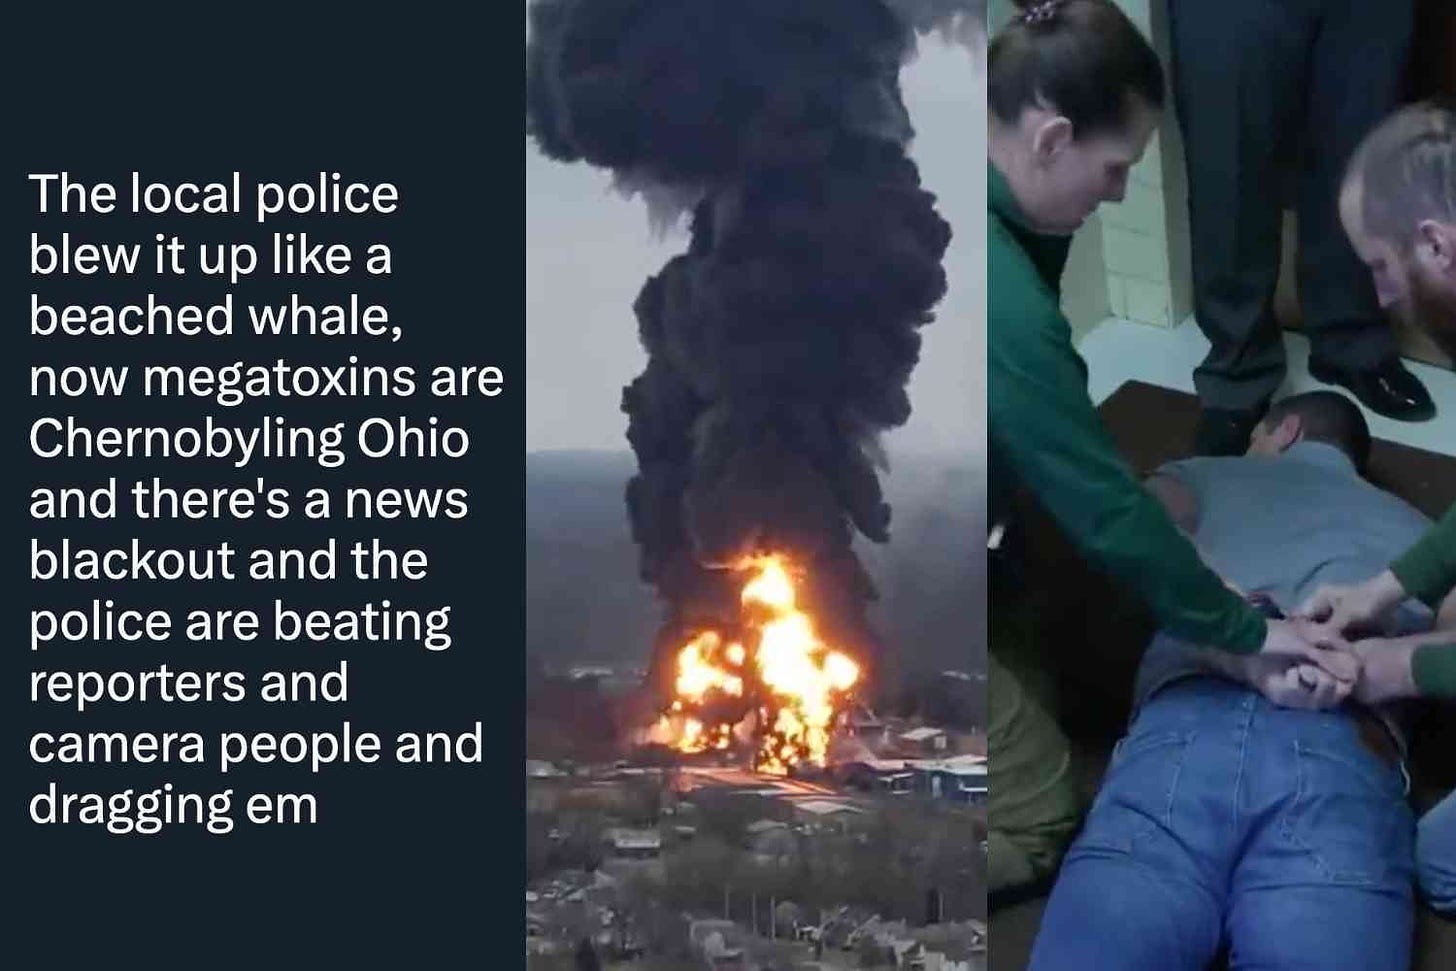 Did you hear about the Ohio train crash last week that sent a plume of toxic gas into the air and is reportedly killing animals for miles around?